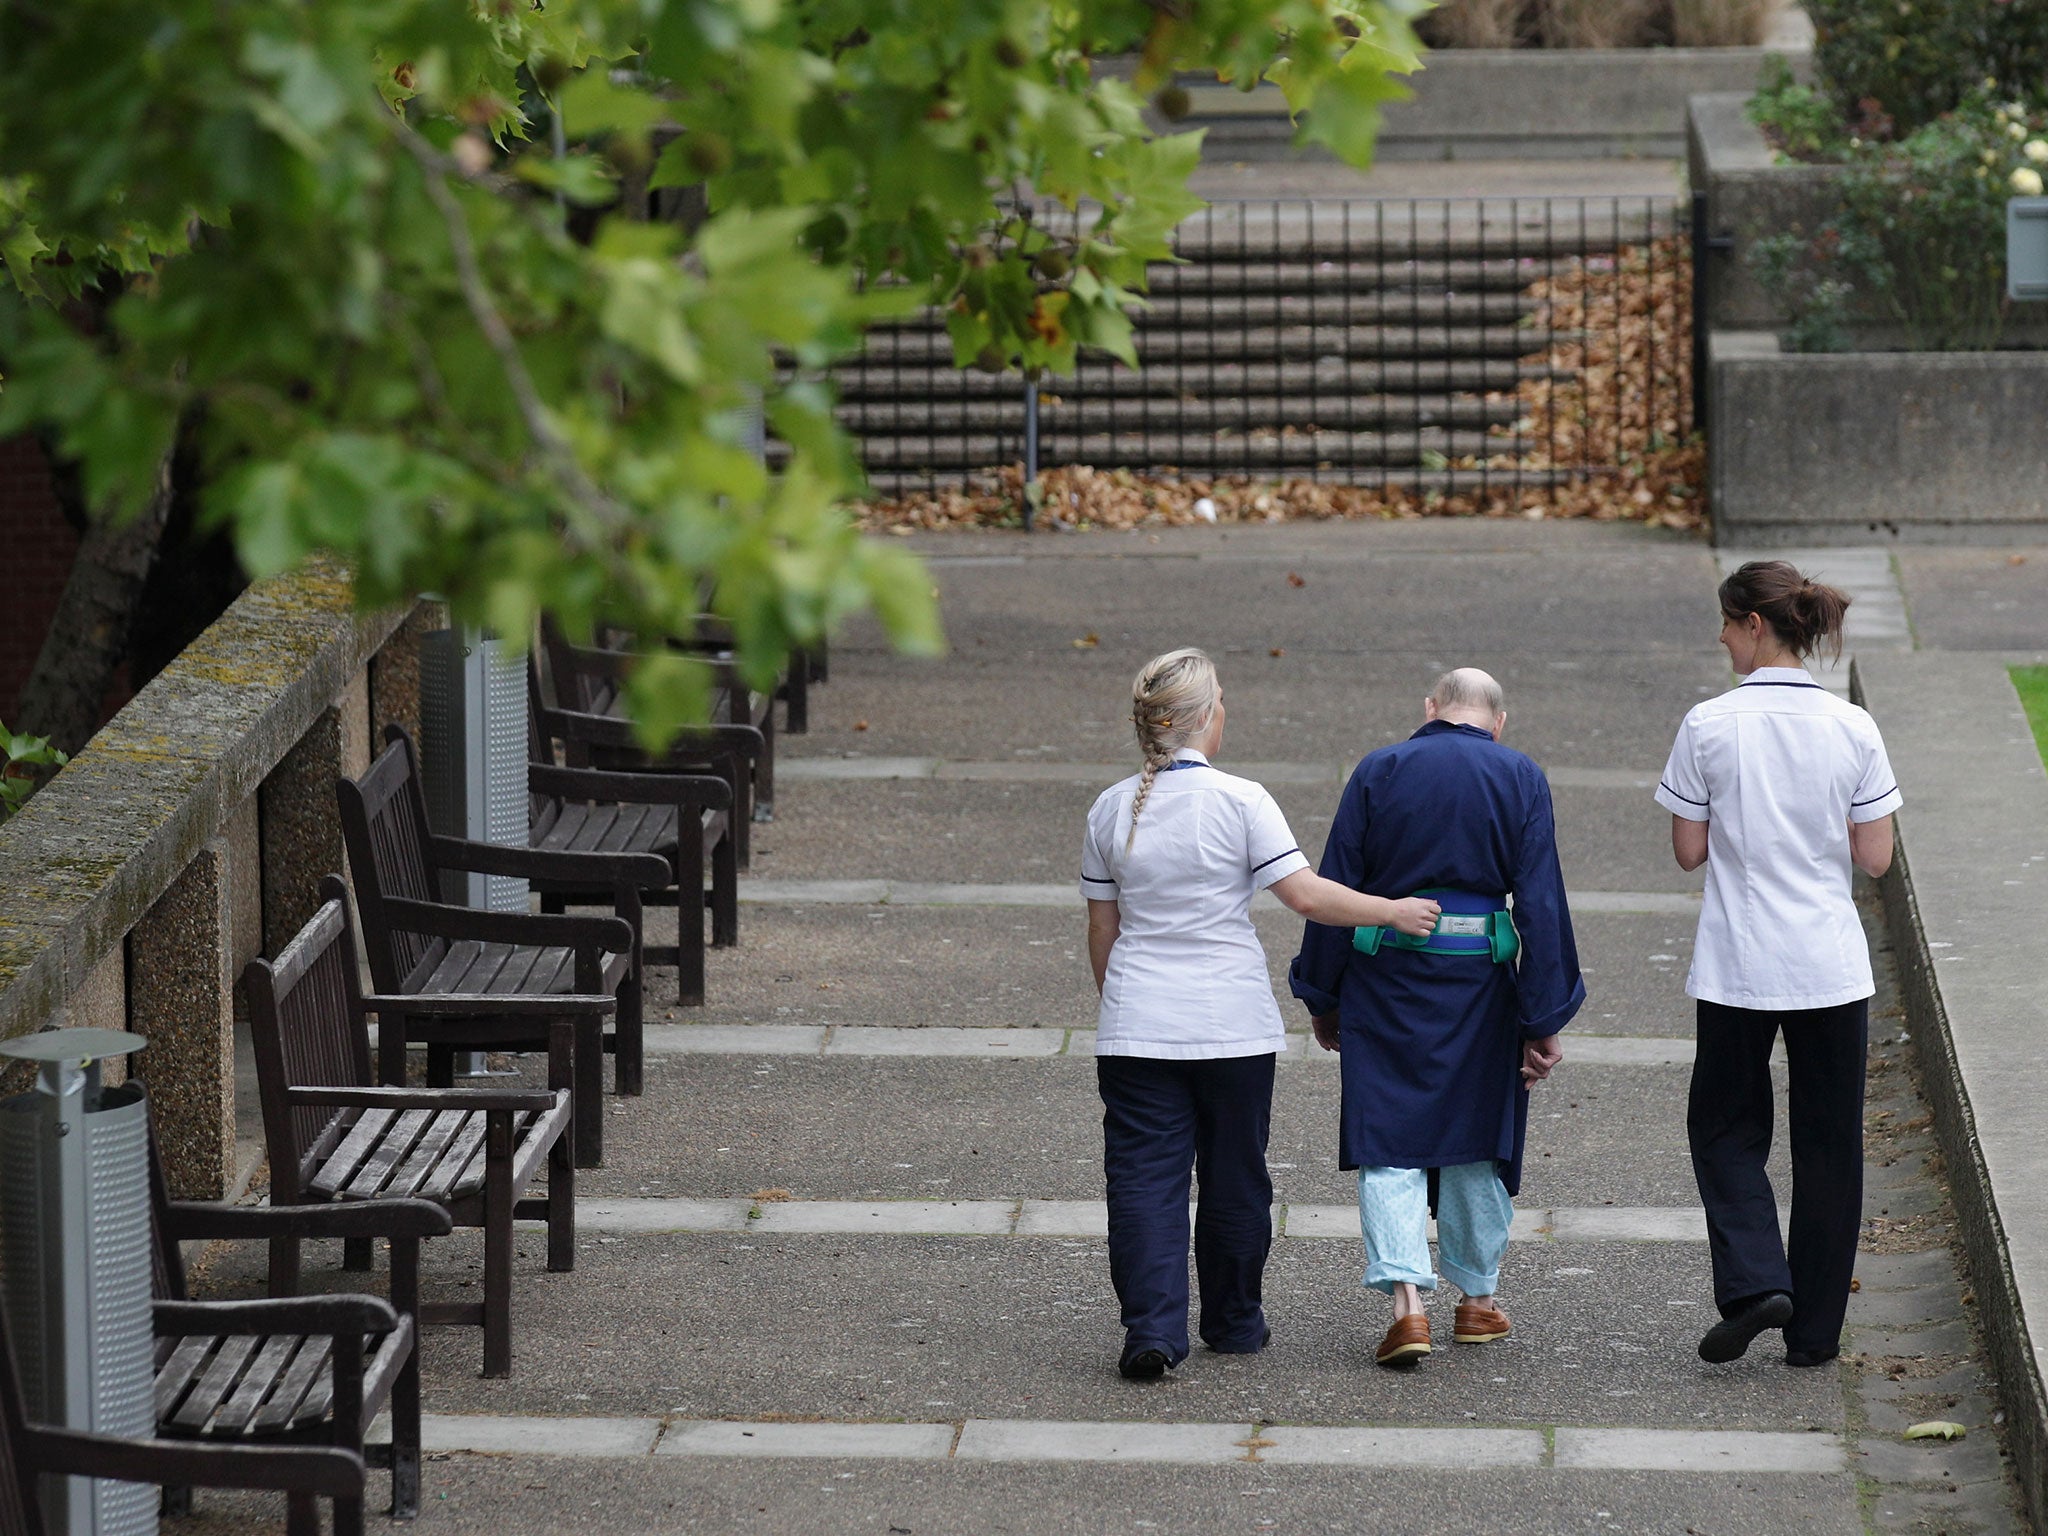 Two NHS staff walk with an elderly patient outside St Thomas' Hospital on October 13, 2011 in London, England.